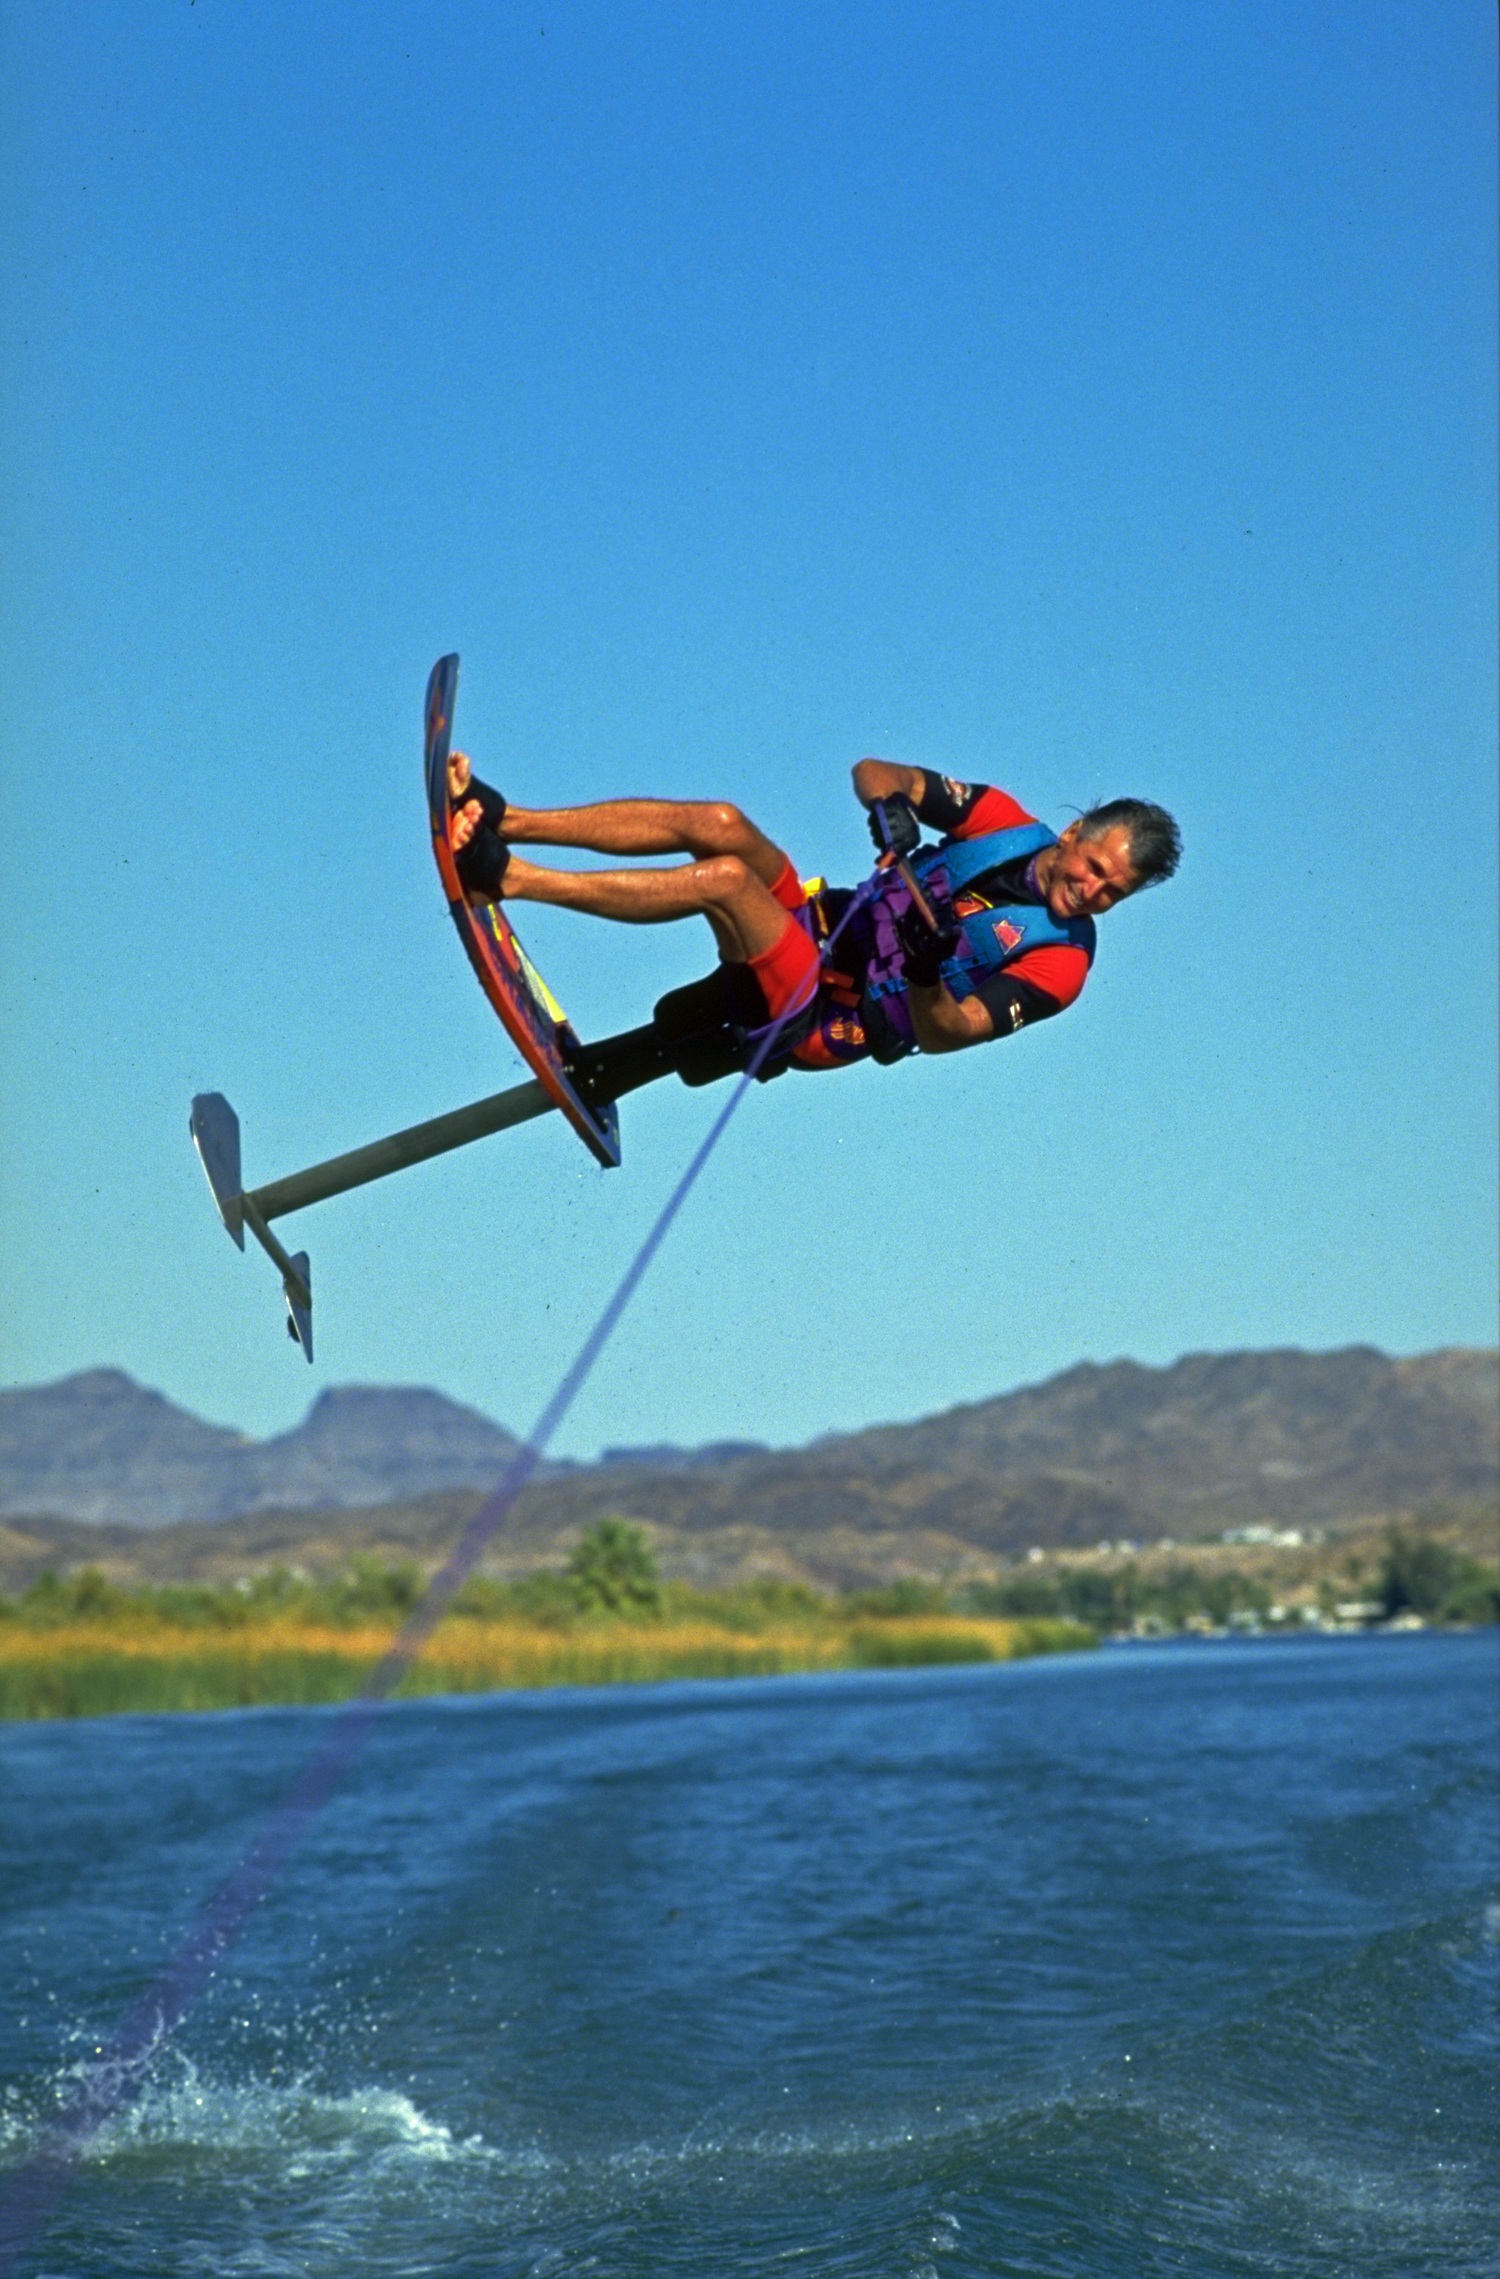 93_TonyKlarich.com_Water_Skiing_Hydrofoil_MMROLL_Creative_Commons_Free_3MR